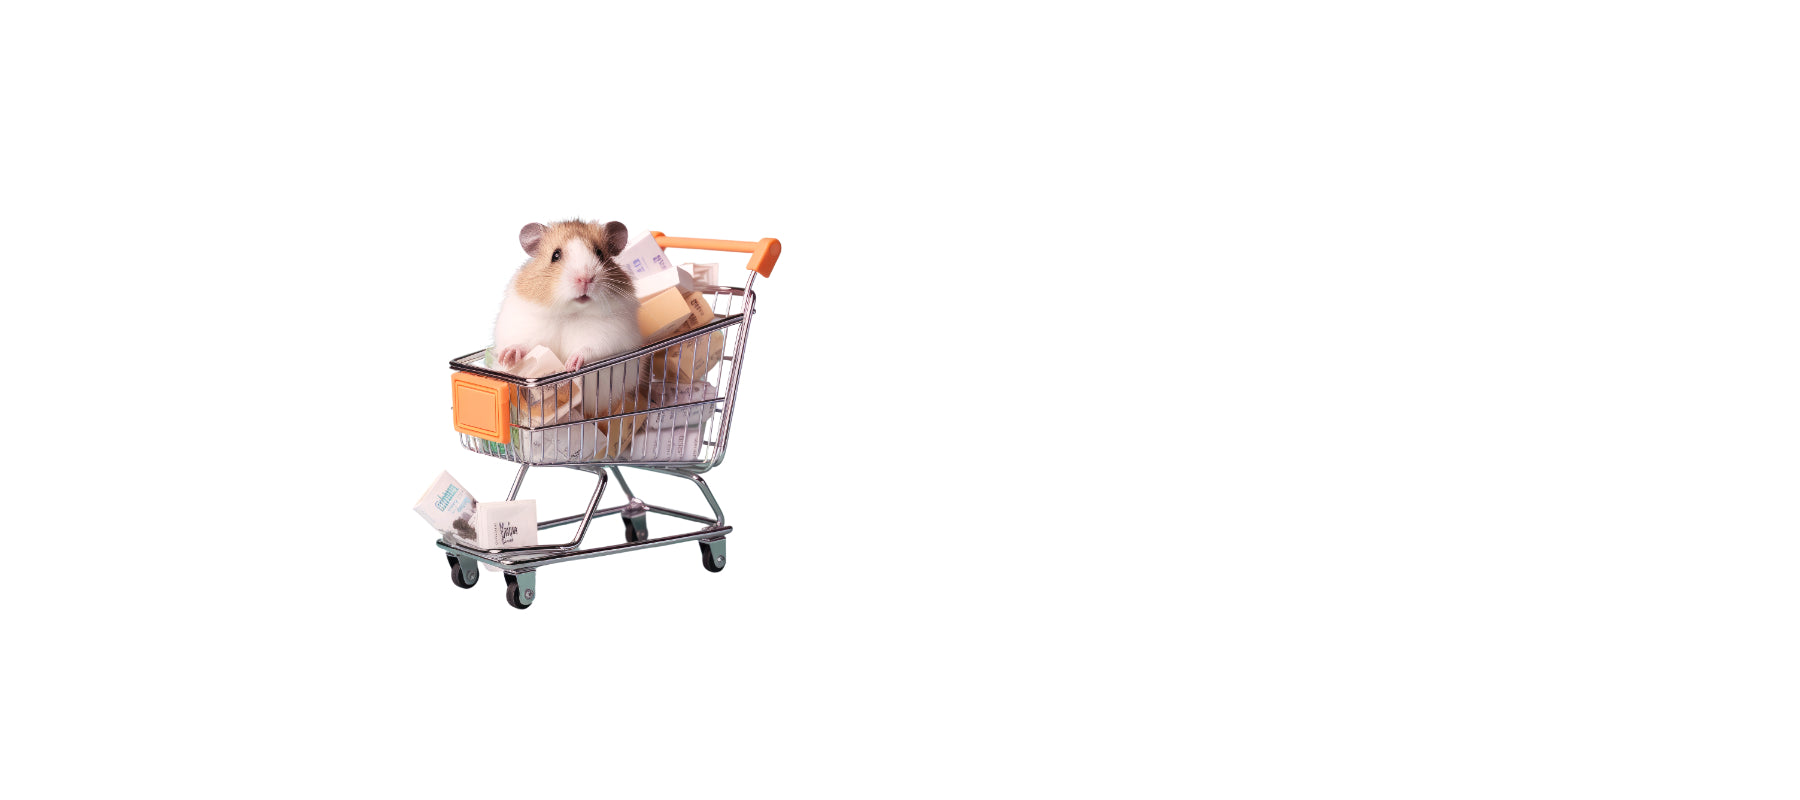 a hamster in a shopping cart